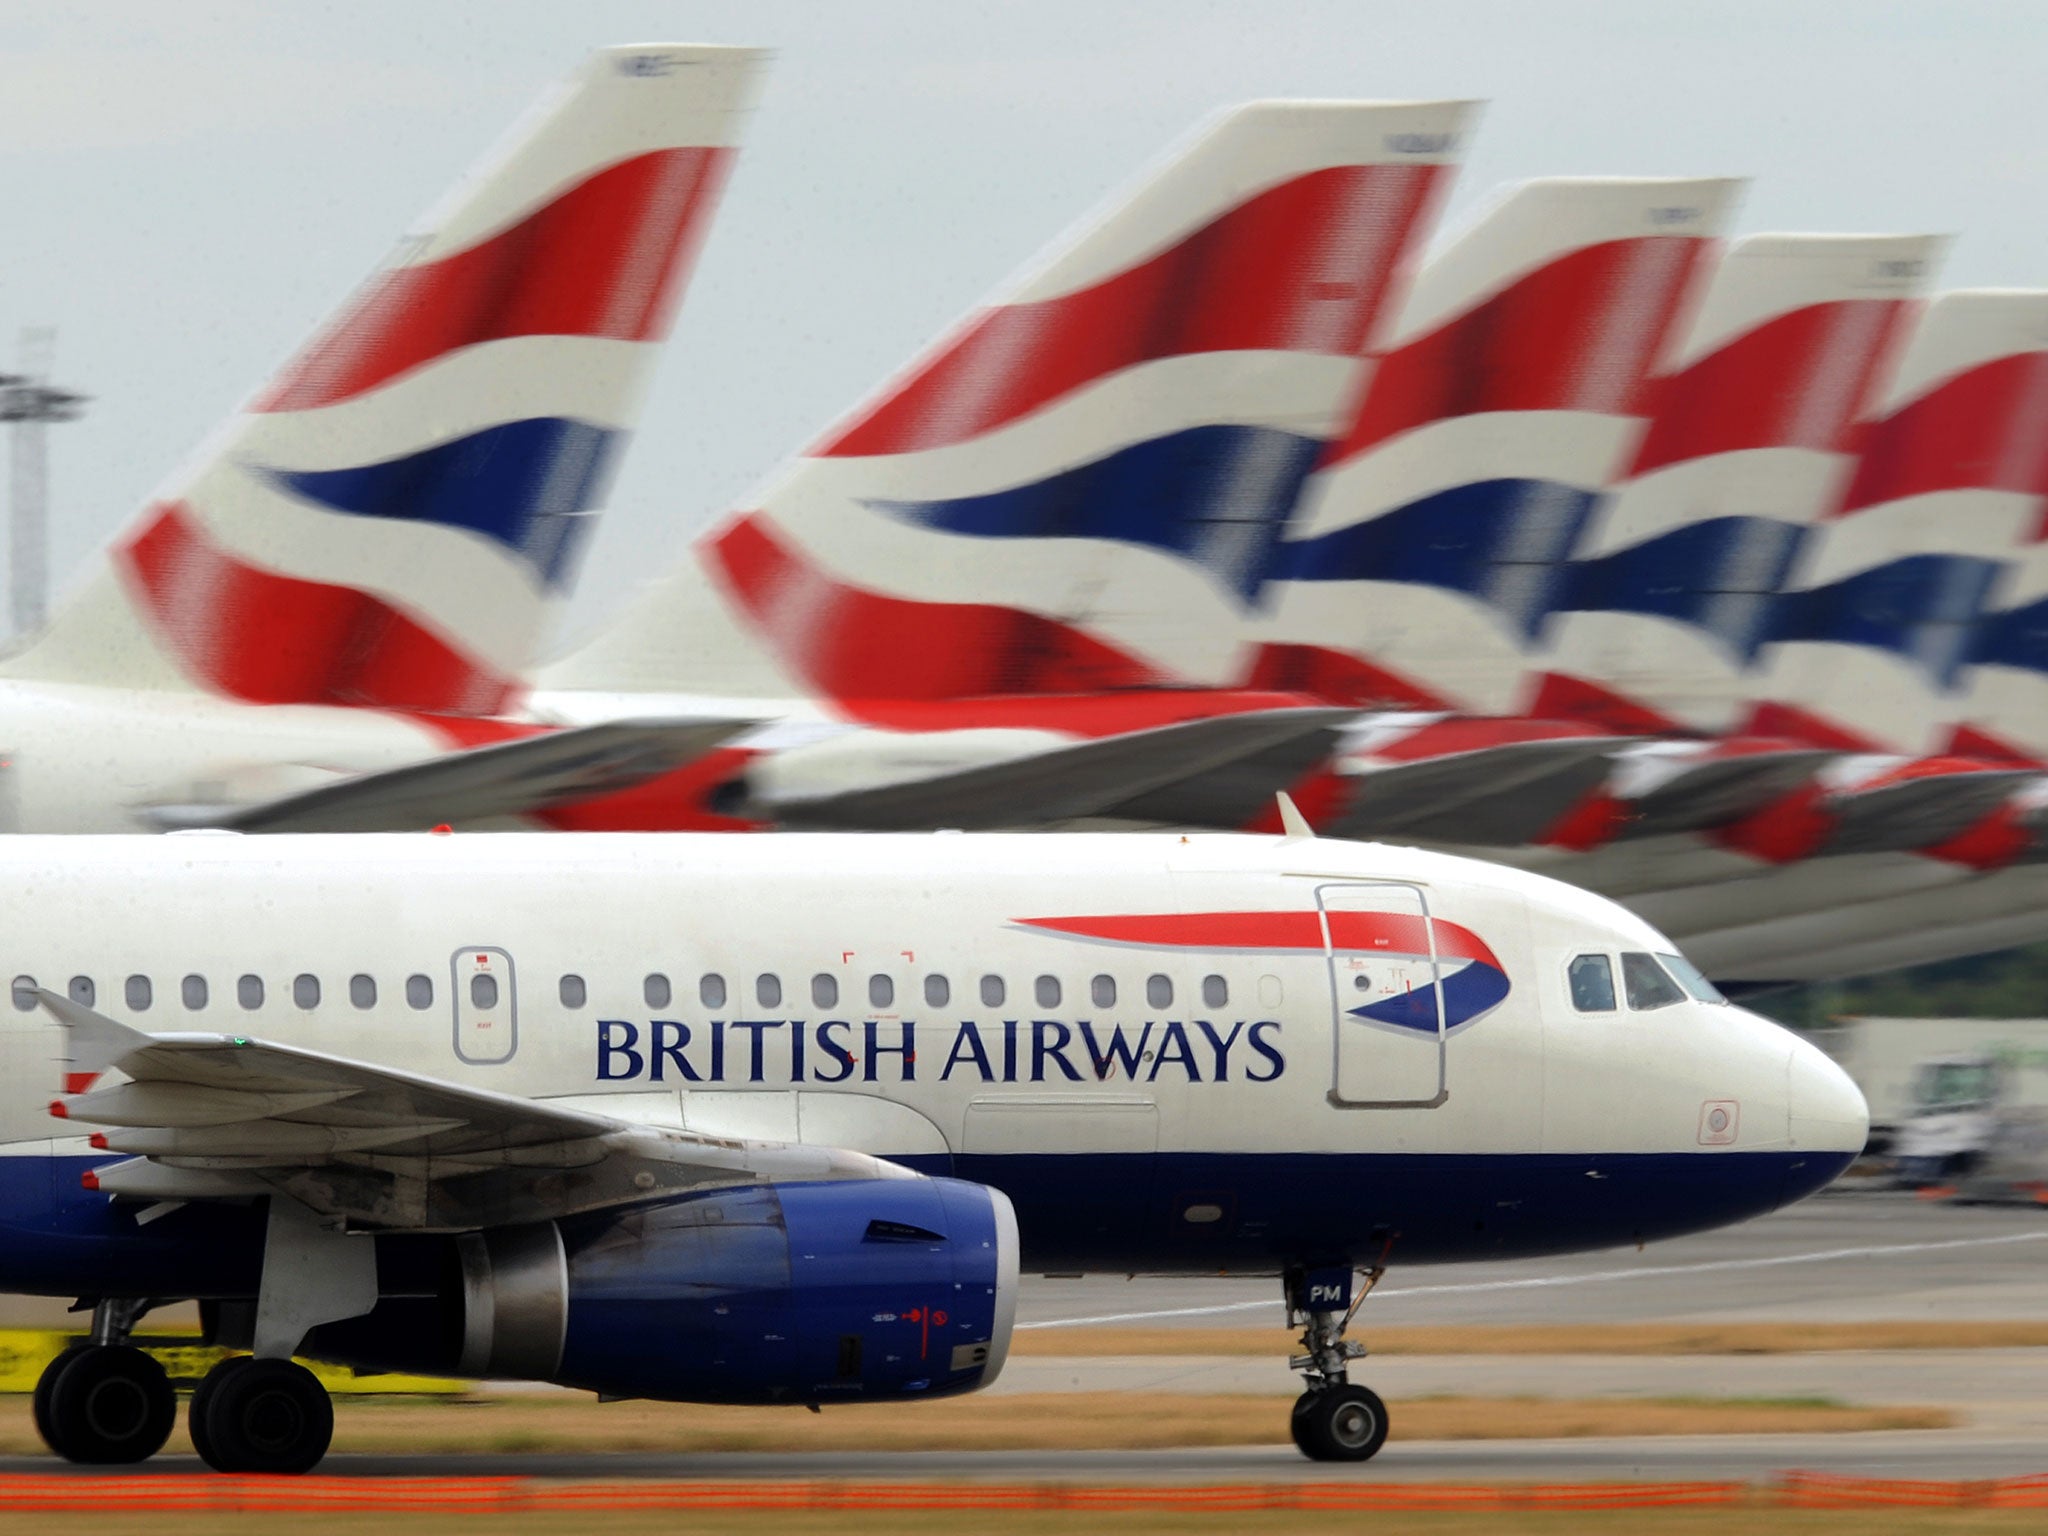 British Airways was the first European airline to let passengers switch on their mobile phones and other devices just after landing